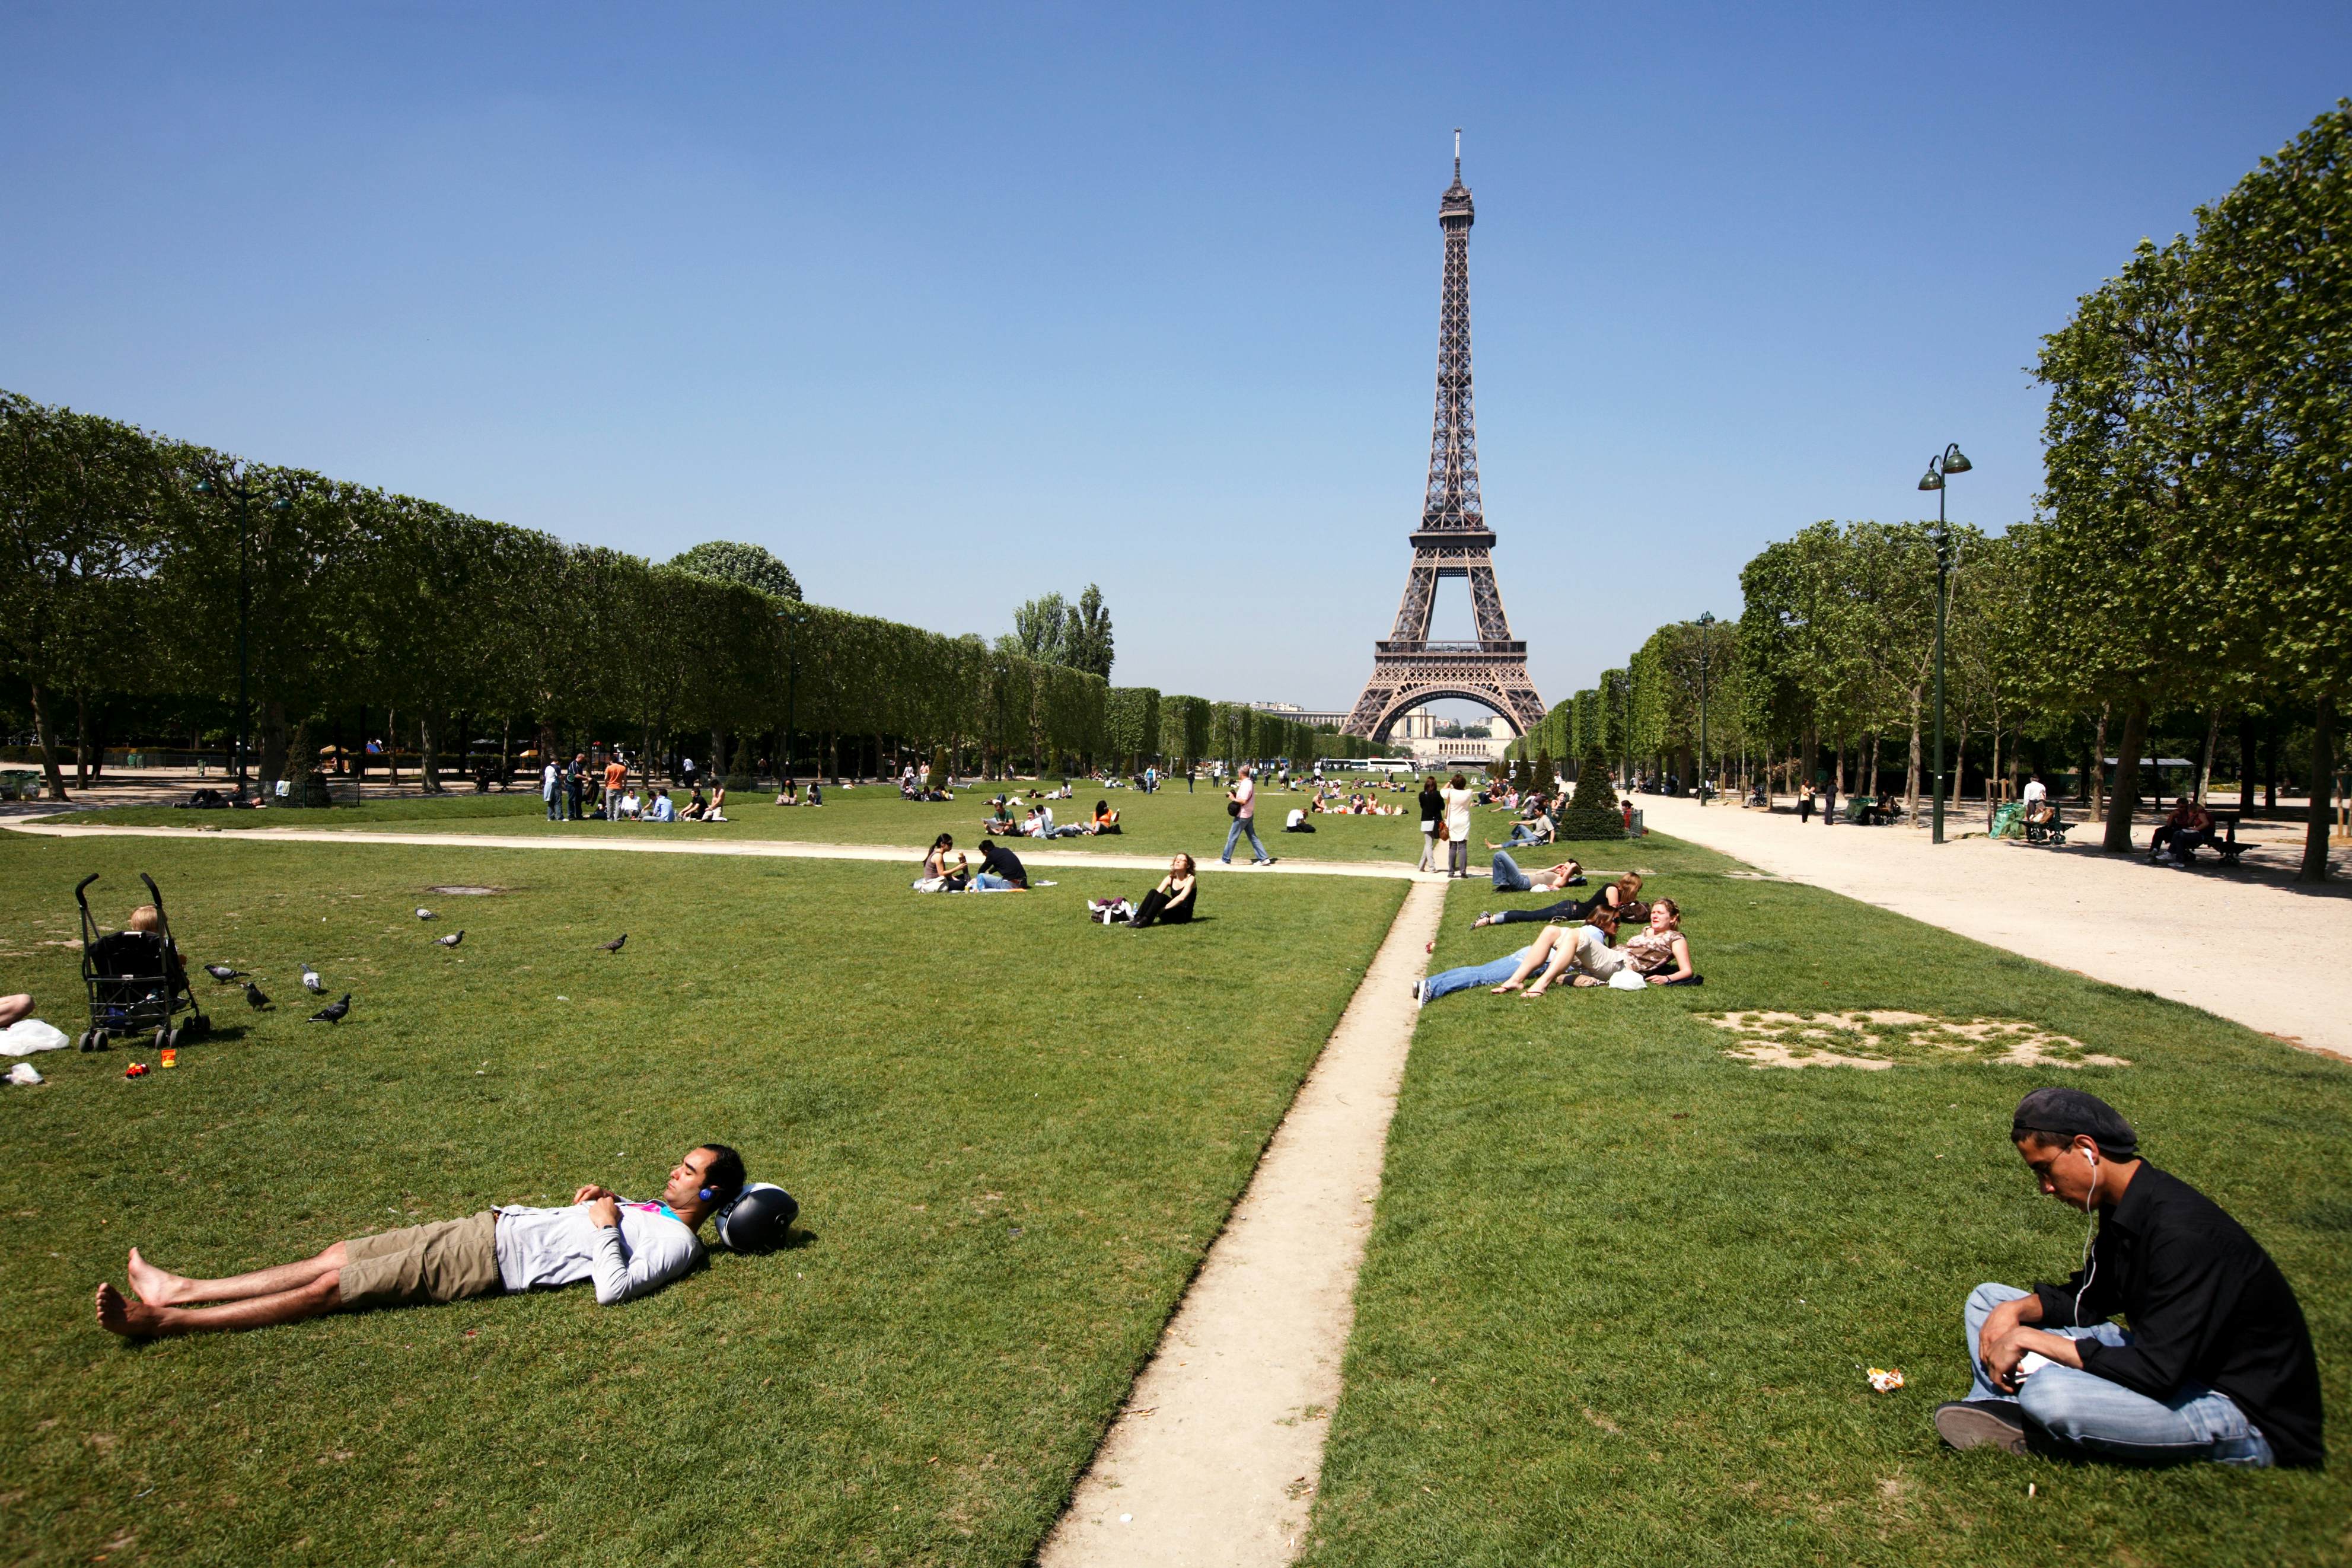 Paris for first-time visitors - Lonely Planet